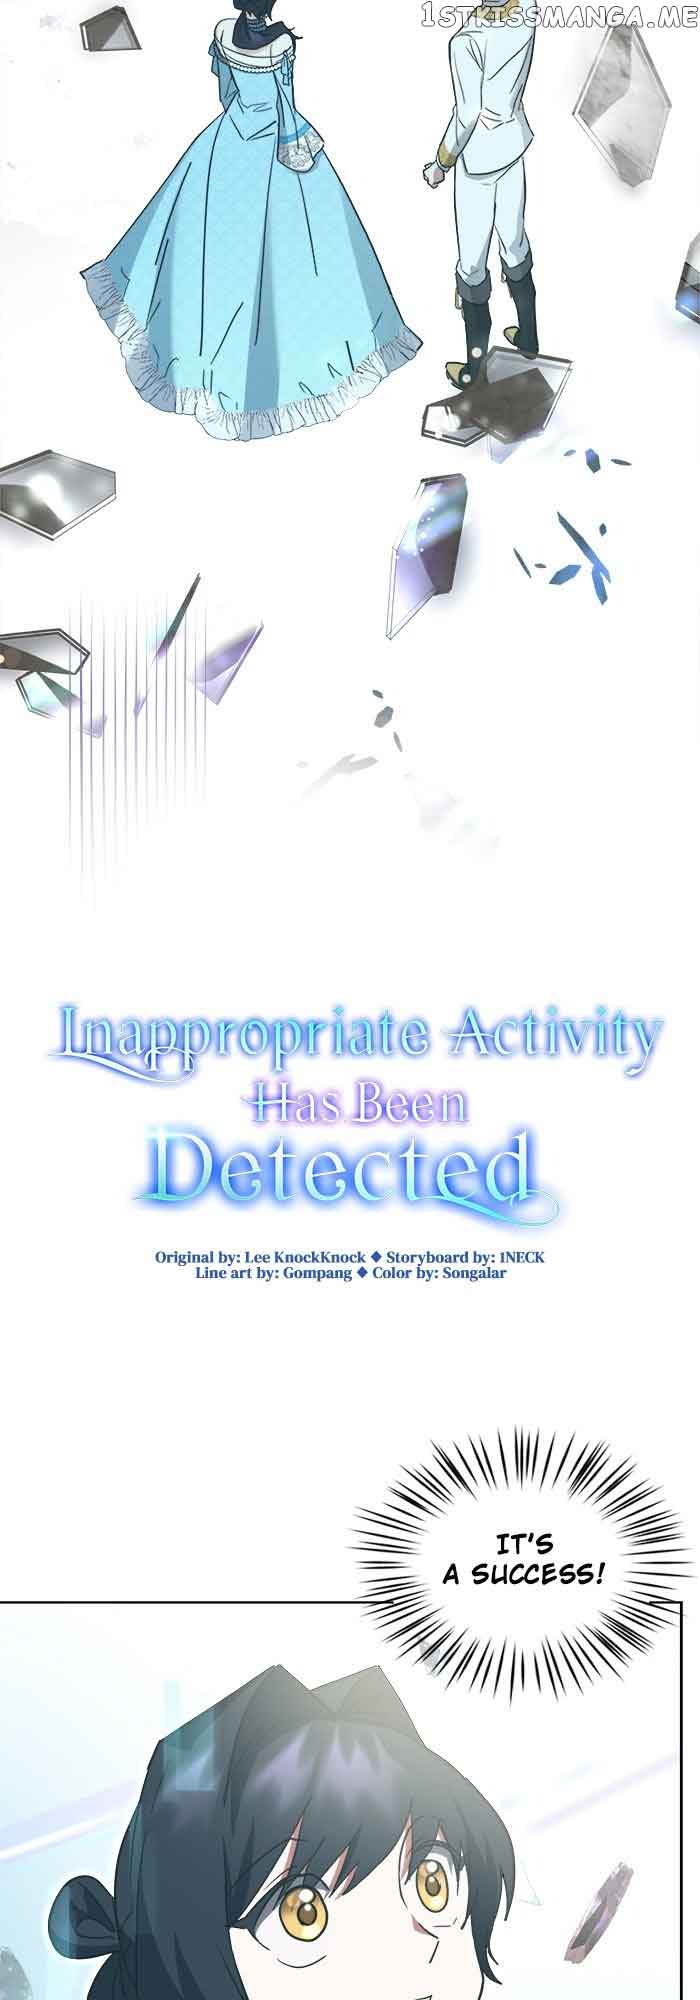 Inappropriate Activity Has Been Detected chapter 7